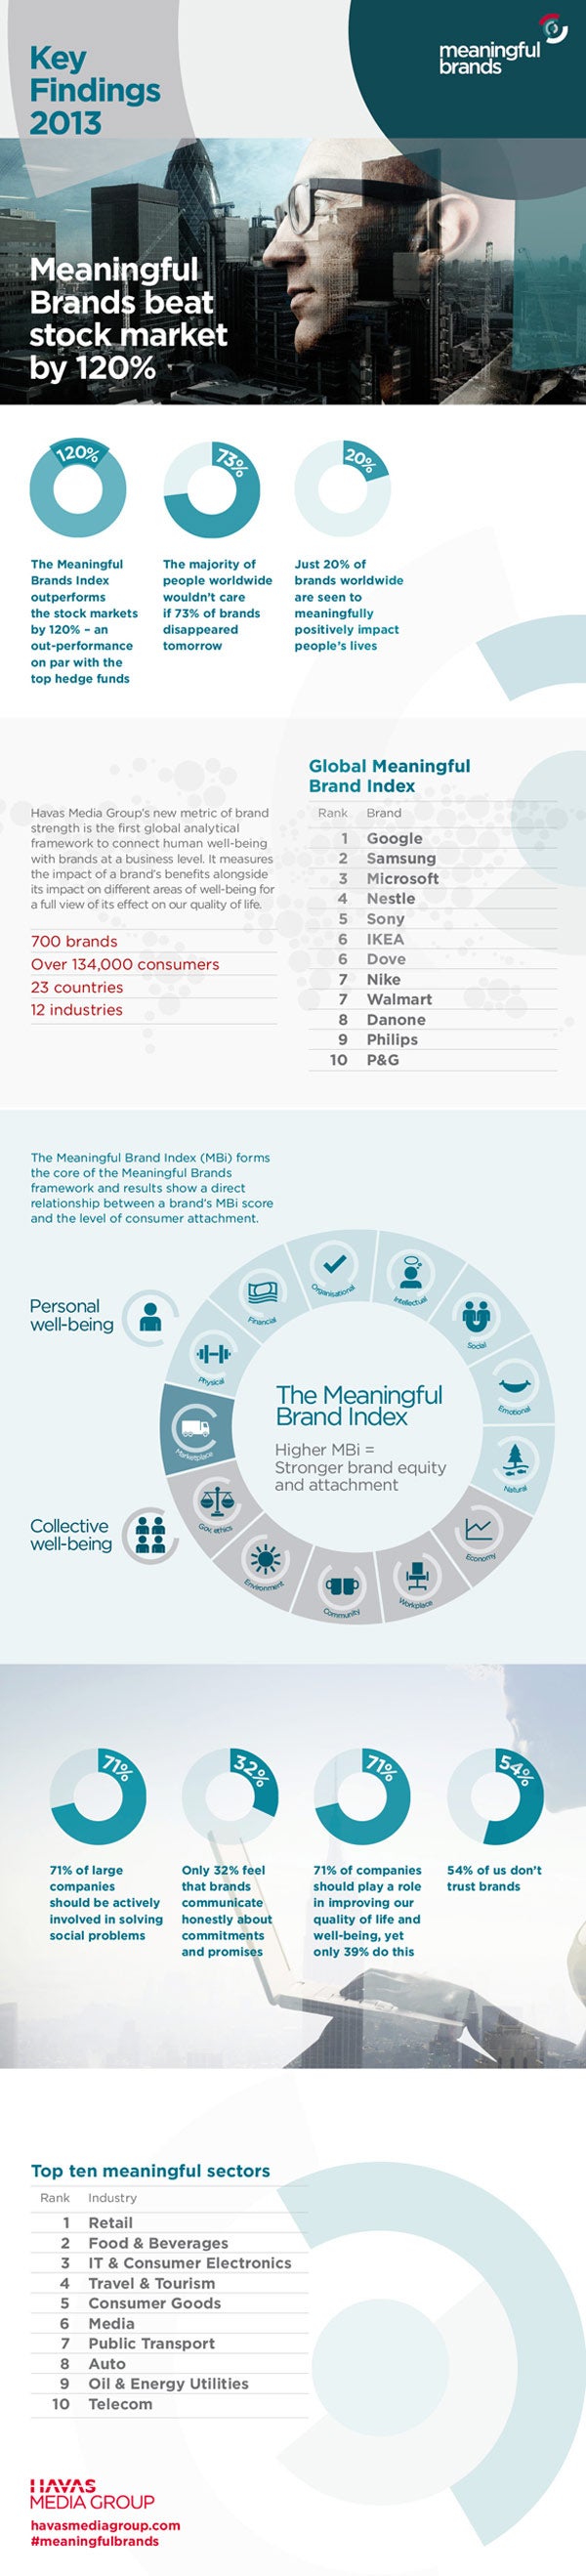 The World's Most Meaningful Brands (Infographic)